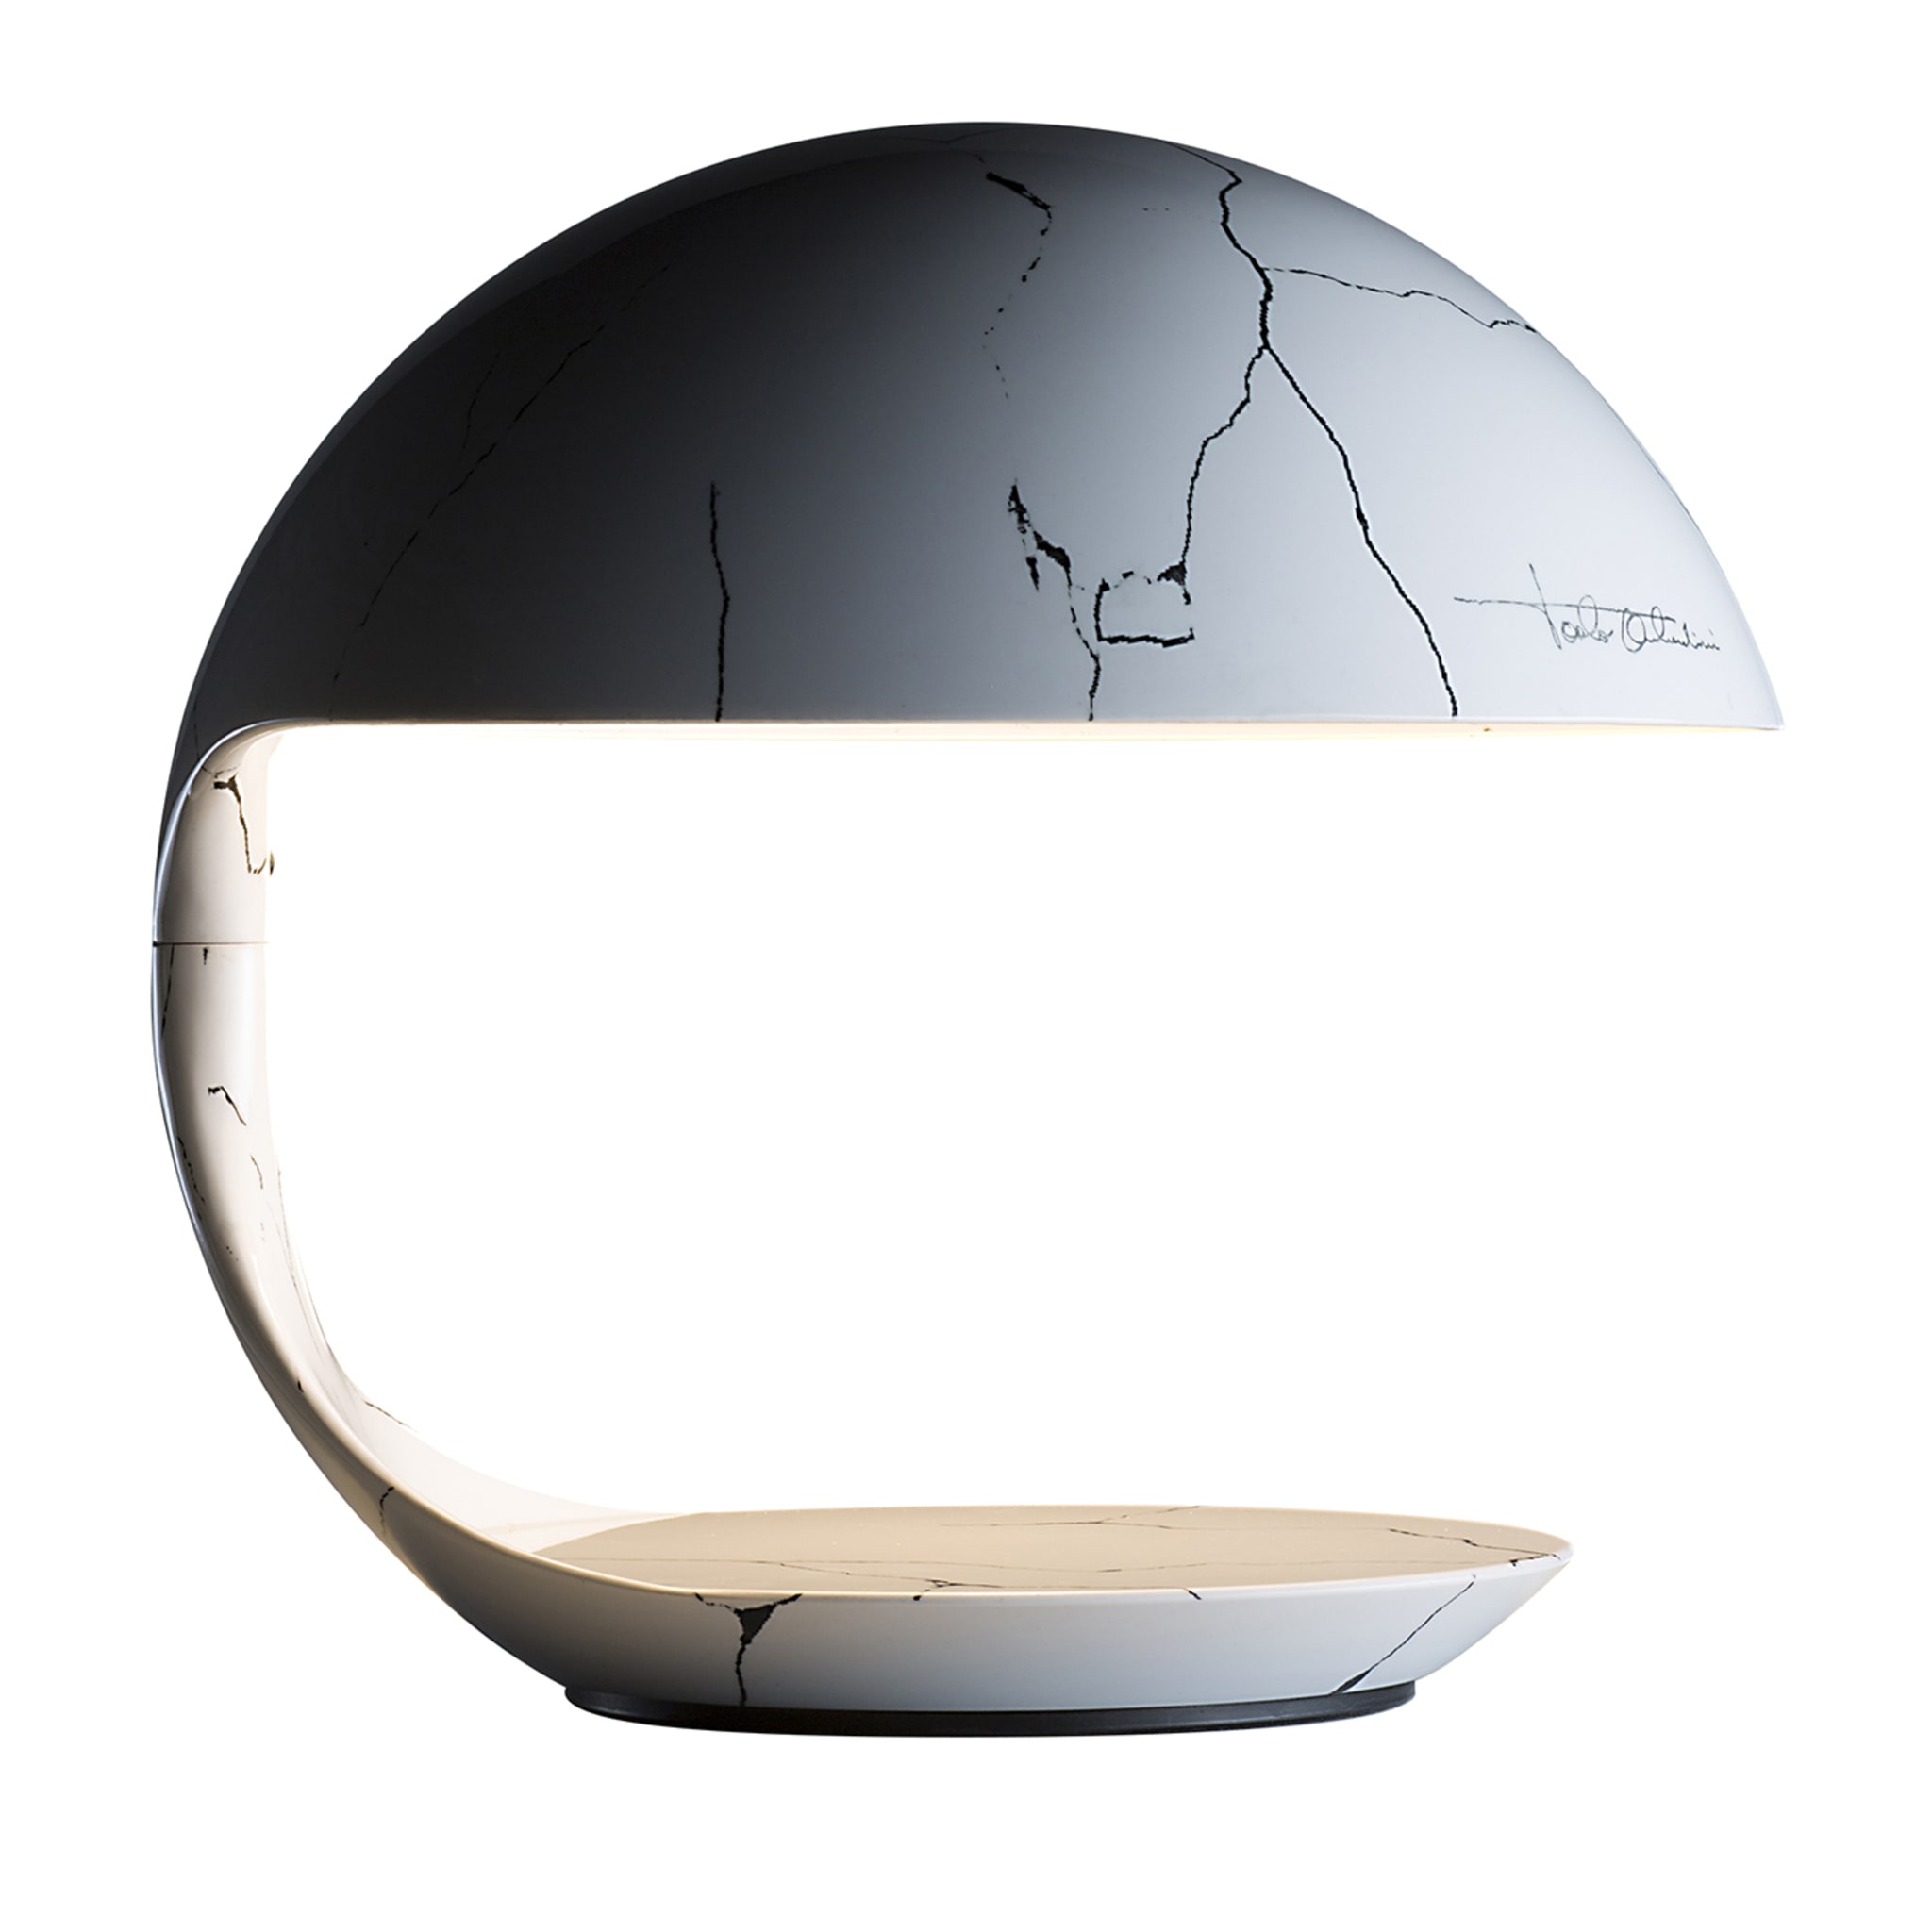 Cobra Texture Kintsugi Table Lamp by Paolo Orlandini - Main view